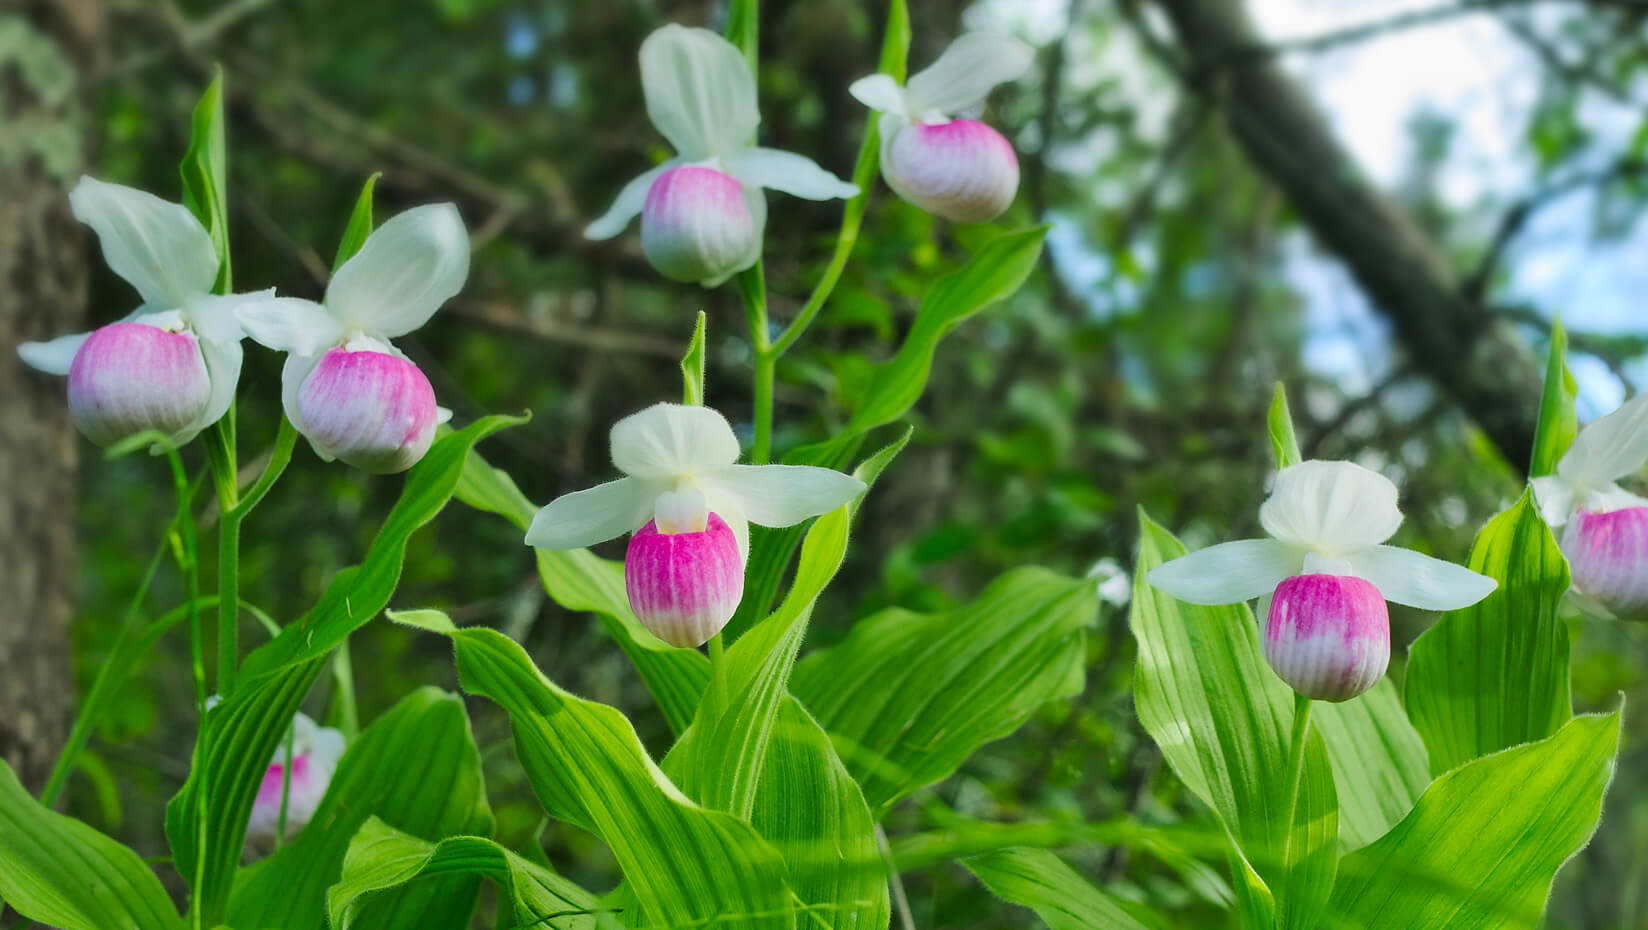 Photo of orchids native to Maine